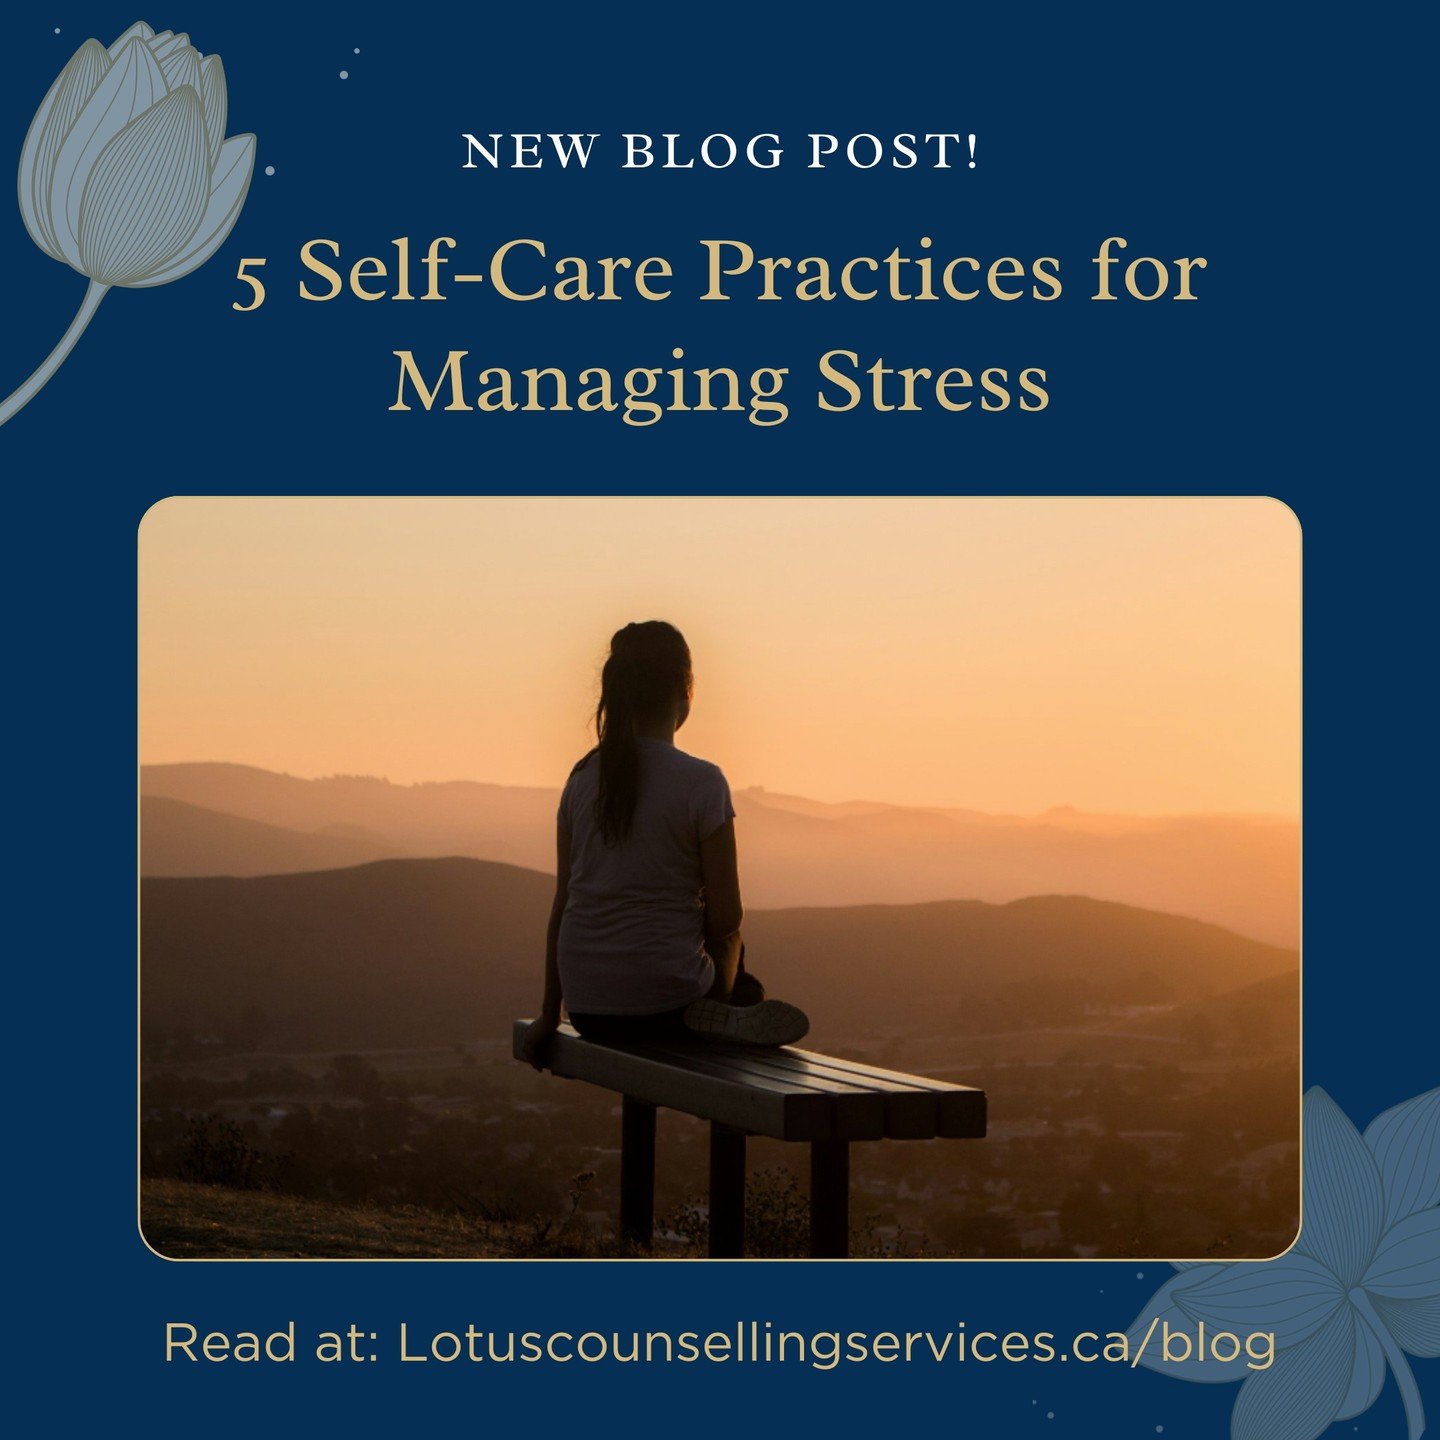 Start your week on a positive note by prioritizing your mental well-being. Check out our latest blog post for practical self-care practices to help you manage stress and cultivate inner peace.

Read at: https://www.lotuscounsellingservices.ca/blog/5-